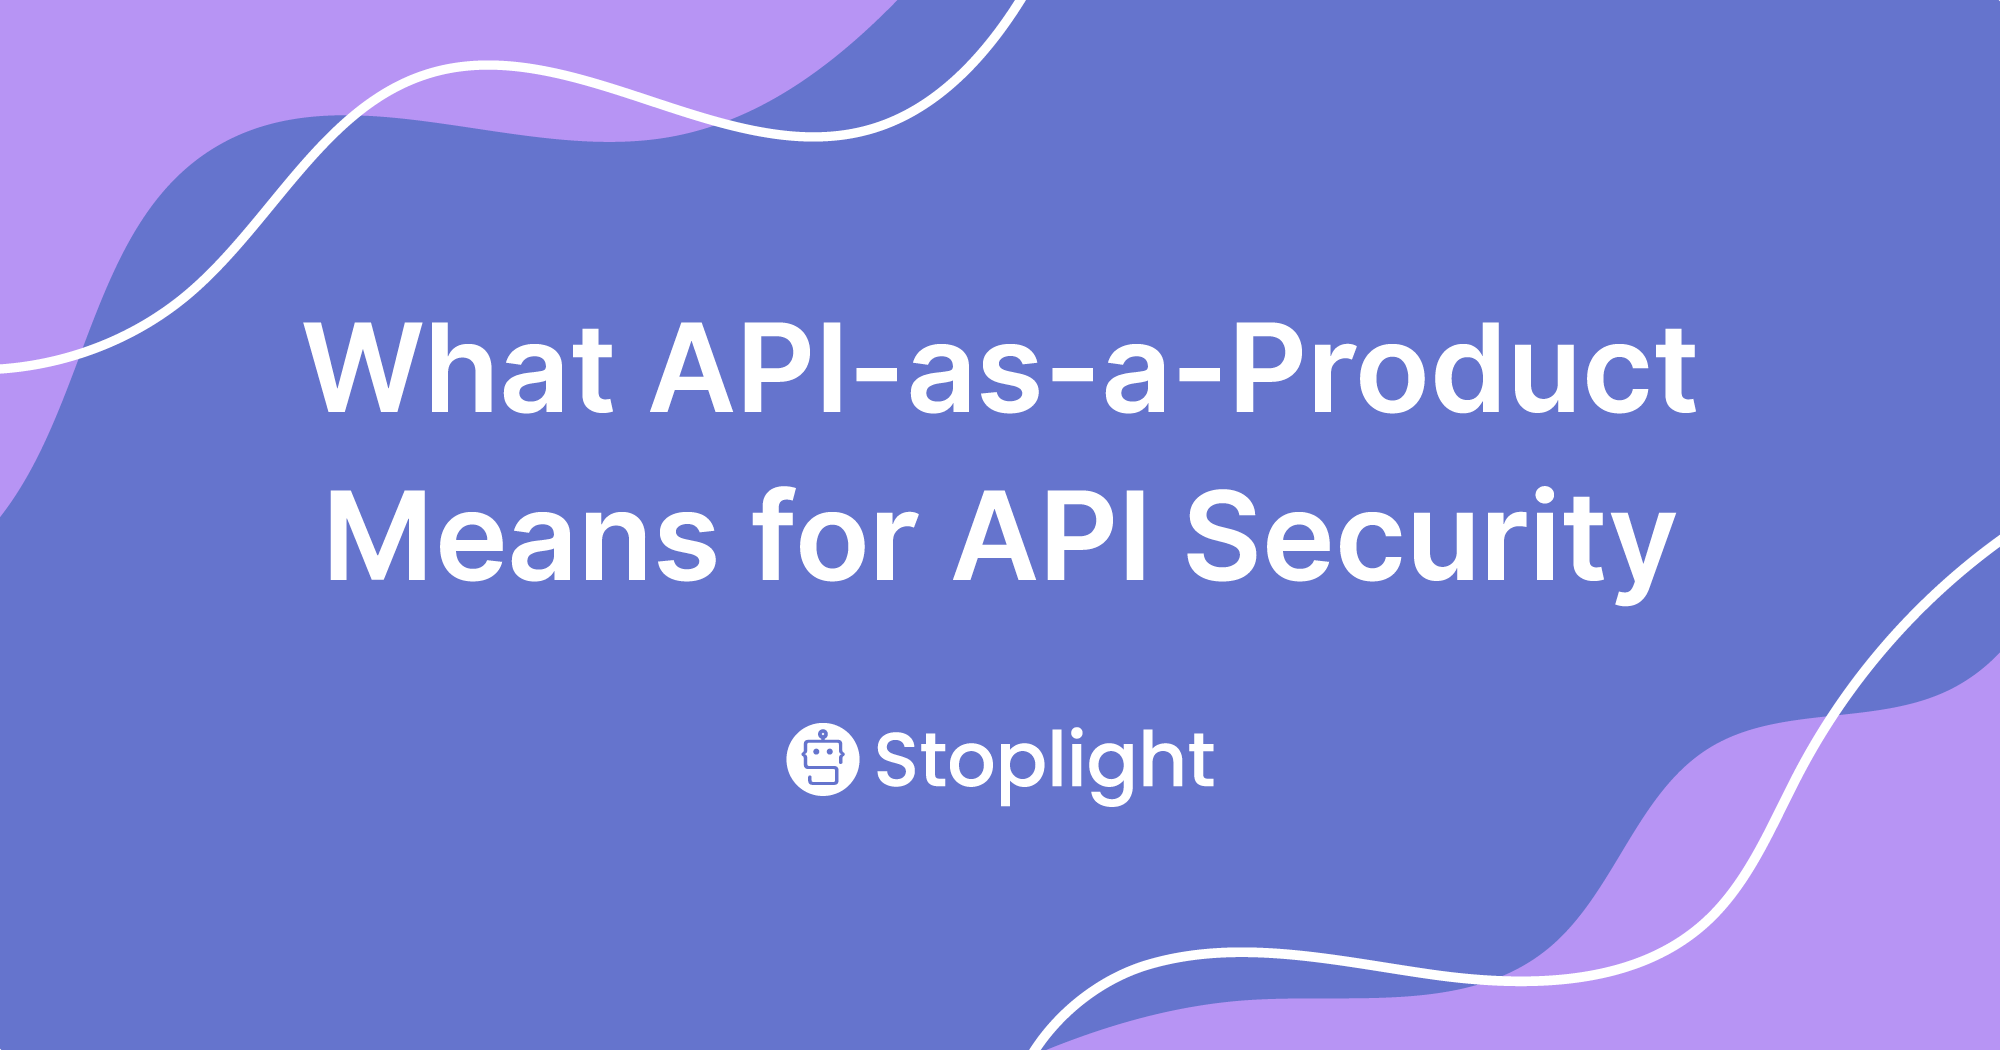 What API-as-a-Product Means for API Security